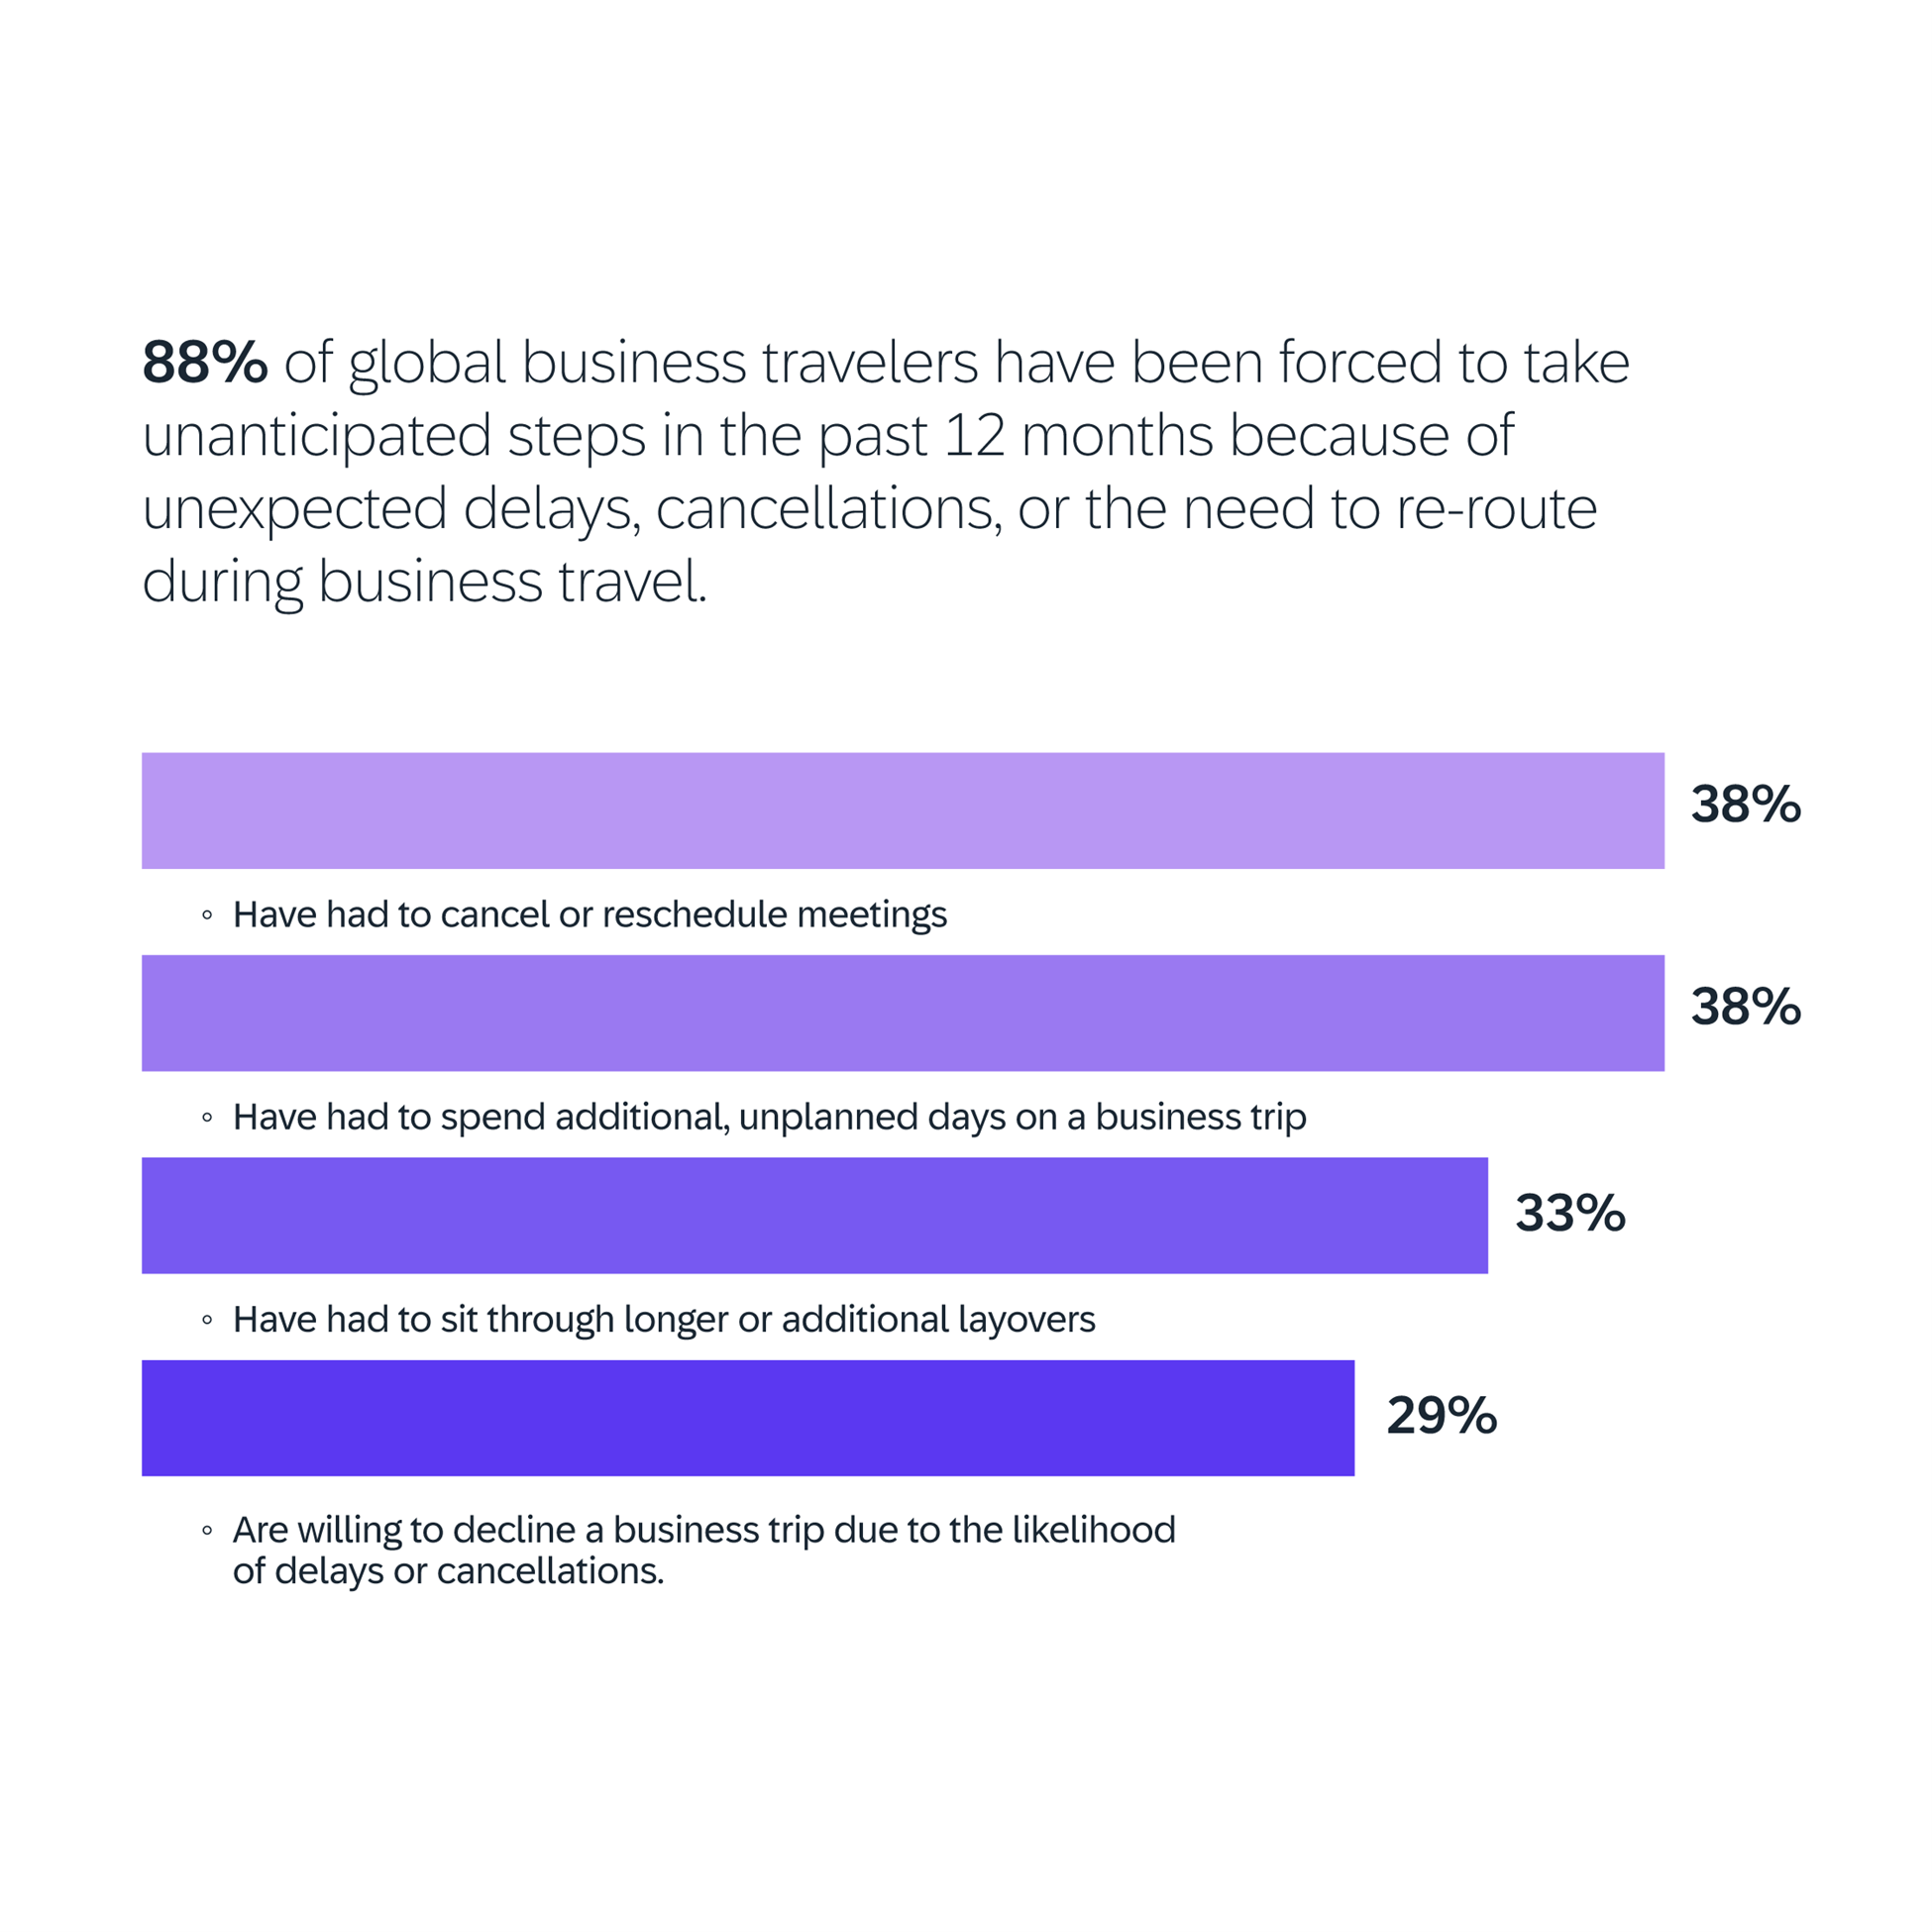 bar chart depicting steps business travelers have been forced to take because of unexpected delays, cancellations, or need to re-route during business travel